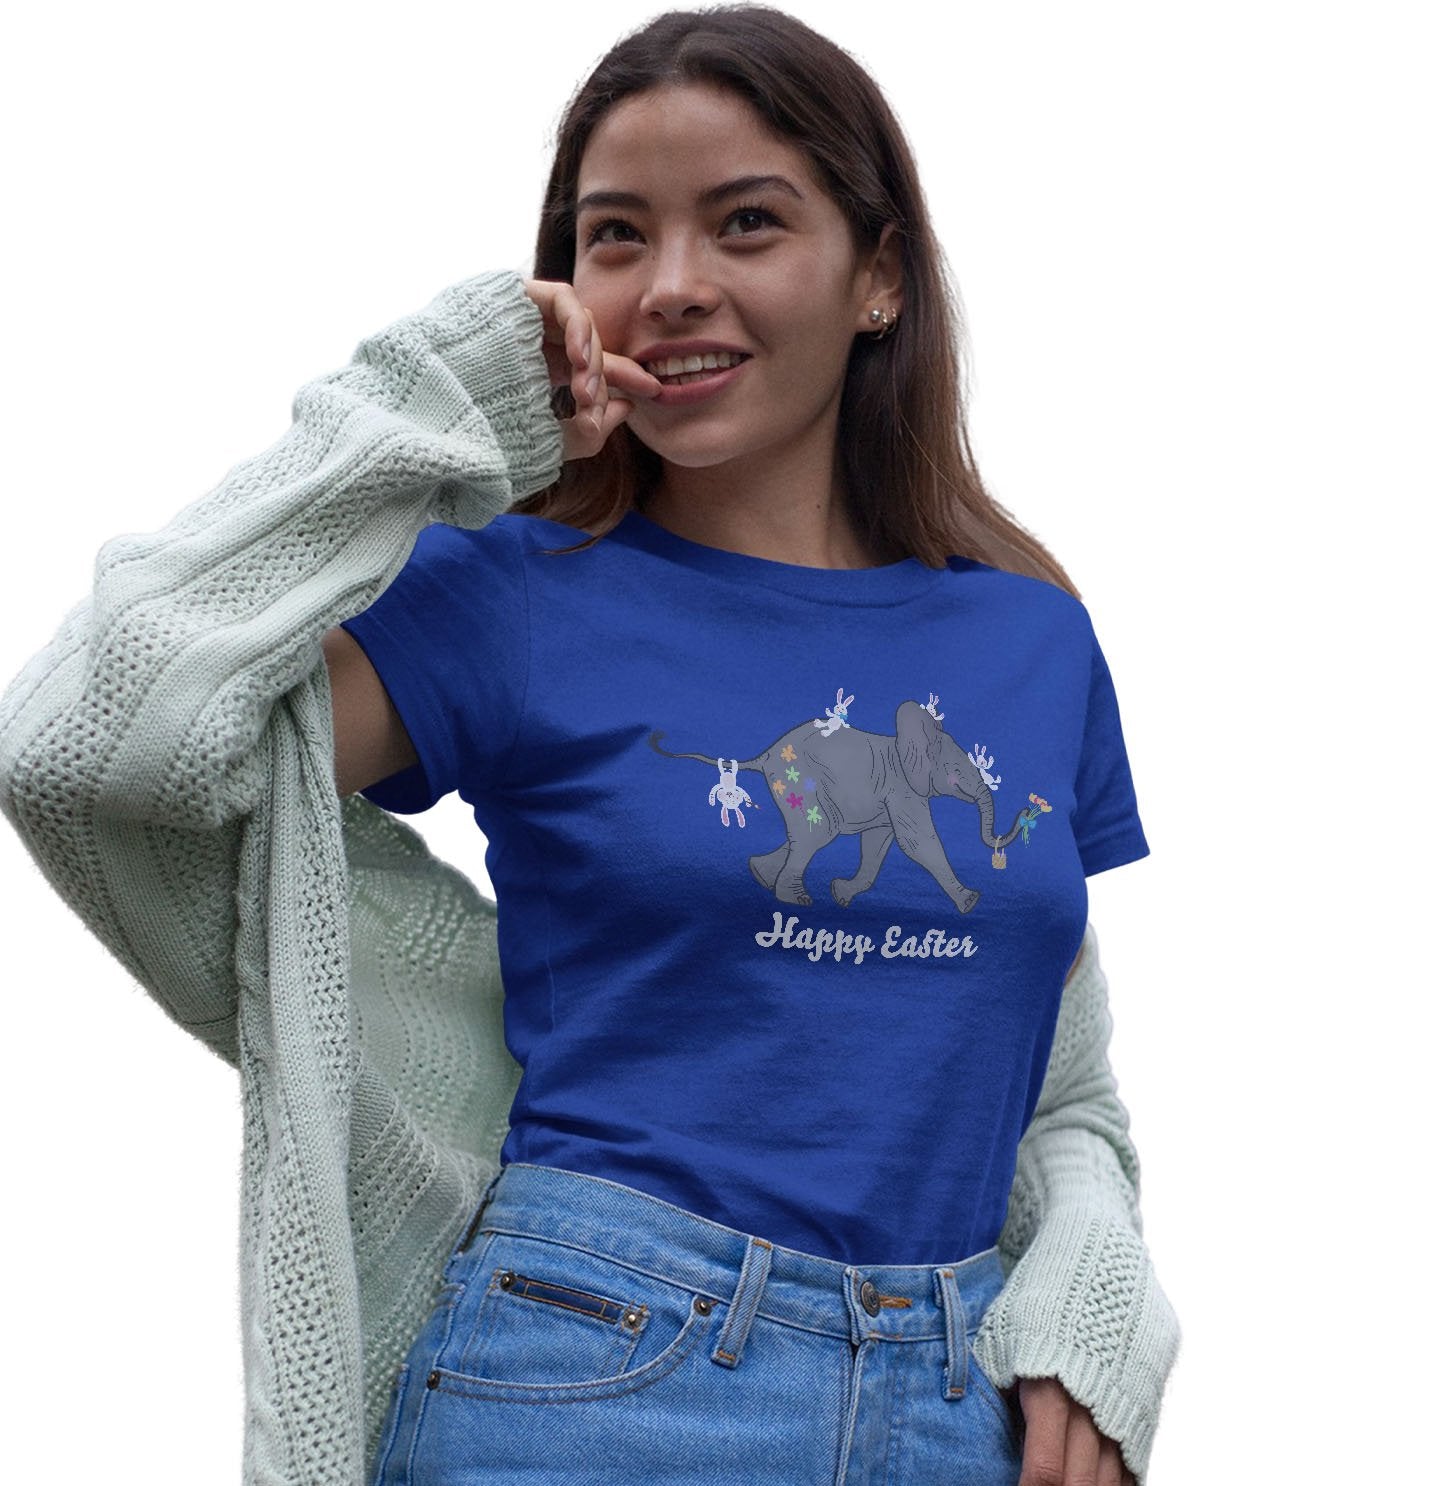 Easter Baby Elephant and Friends - Women's Fitted T-Shirt